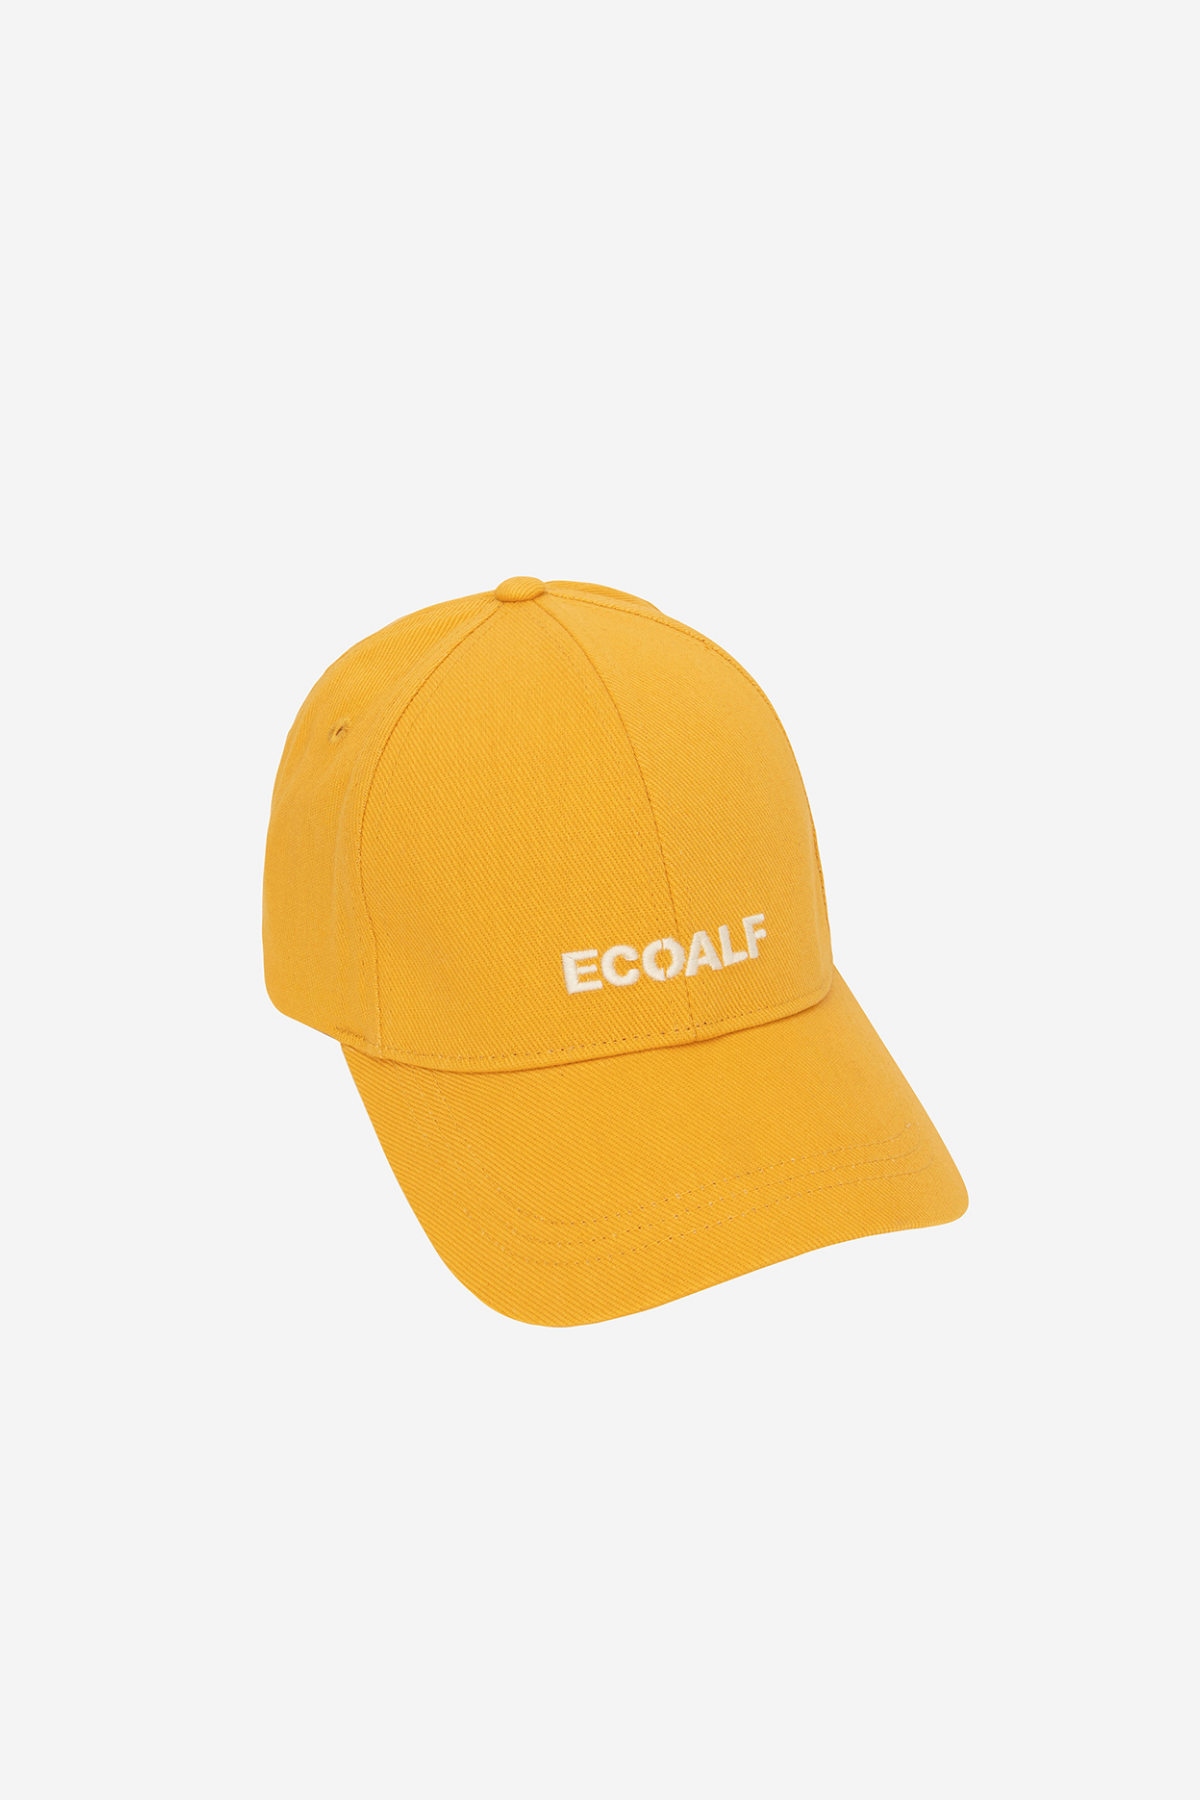 YELLOW EMBROIDERED CAP 